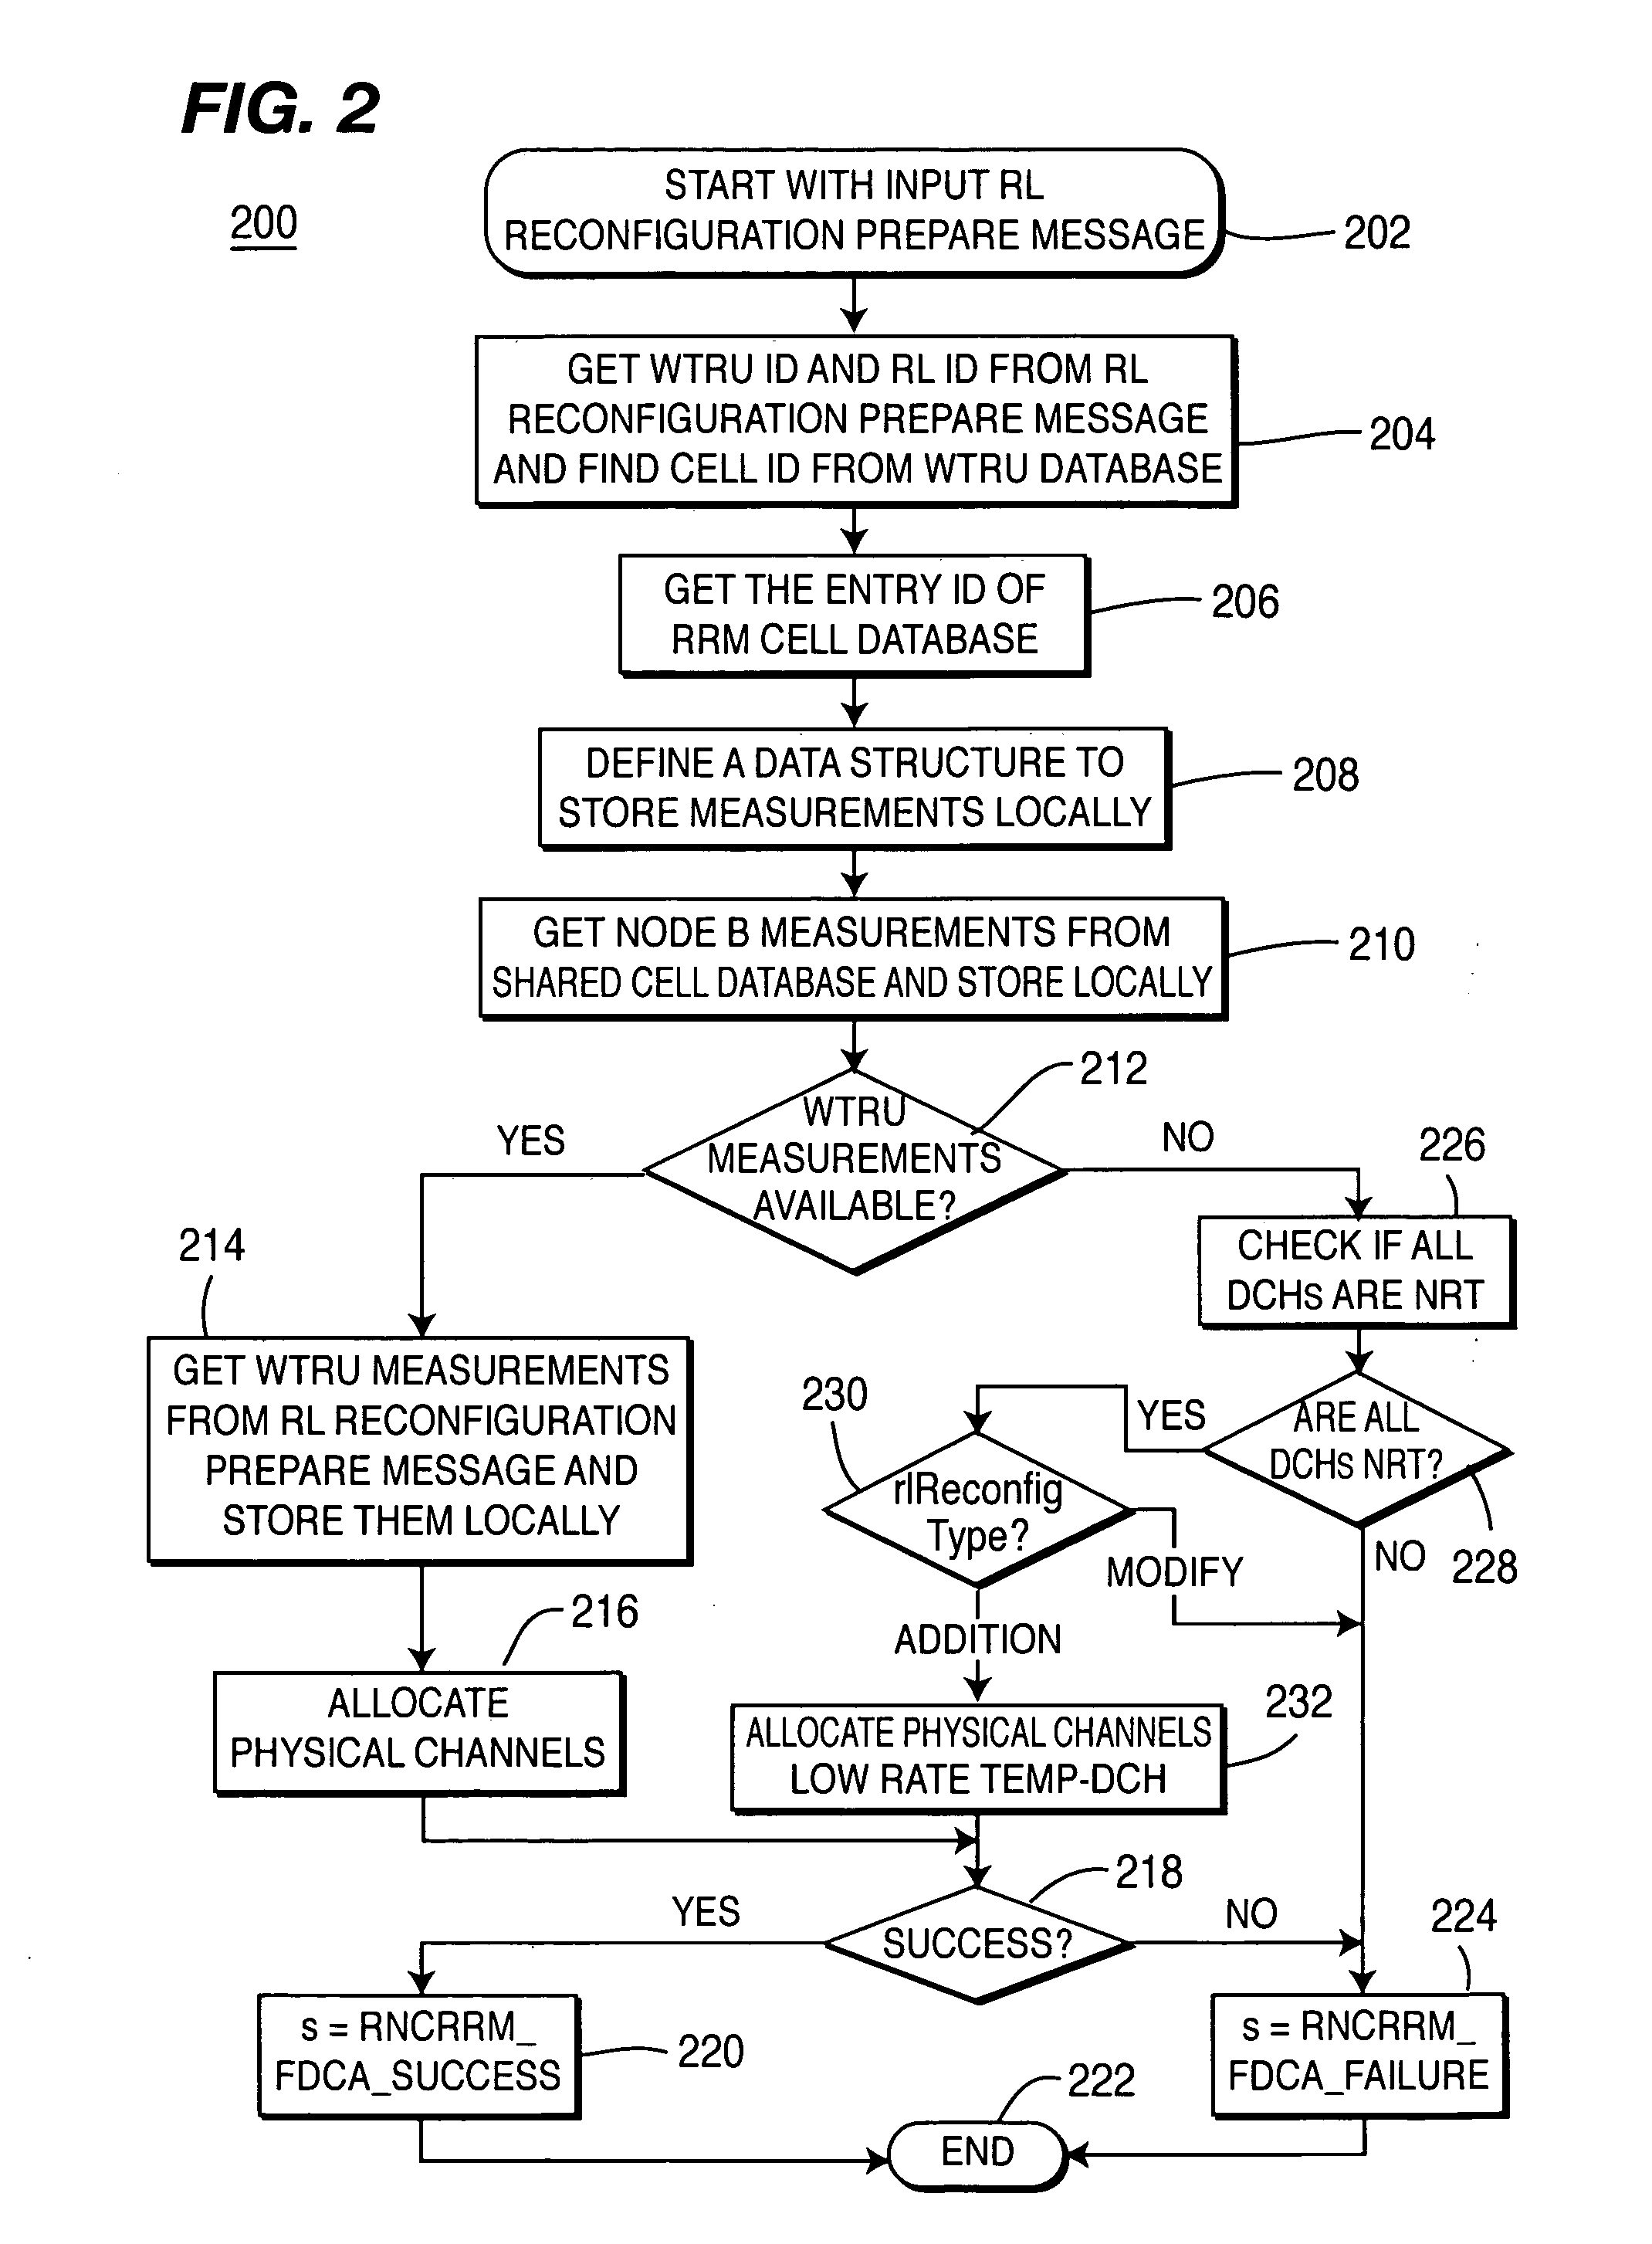 Method for implementing fast-dynamic channel allocation call admission control for radio link reconfiguration in radio resource management